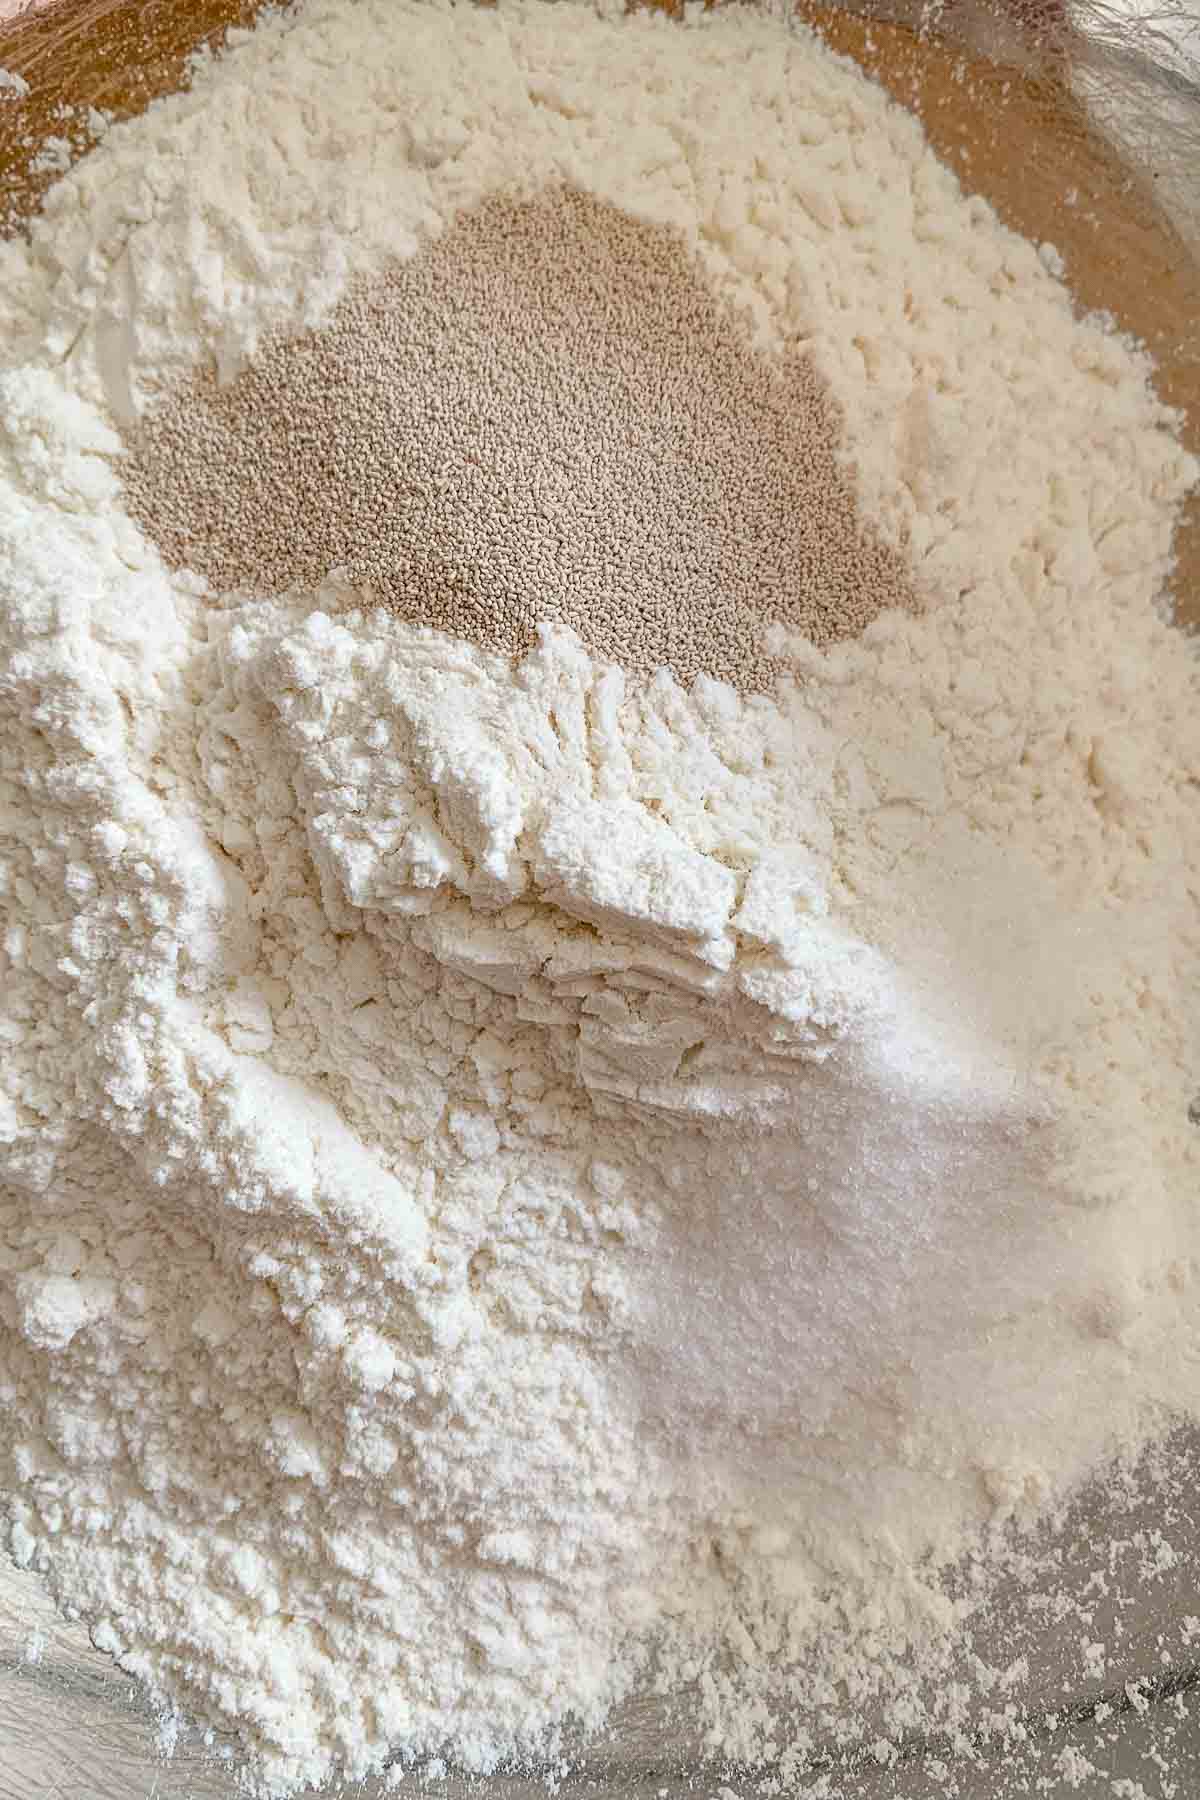 Flour, yeast, and sugar in a mixing bowl.